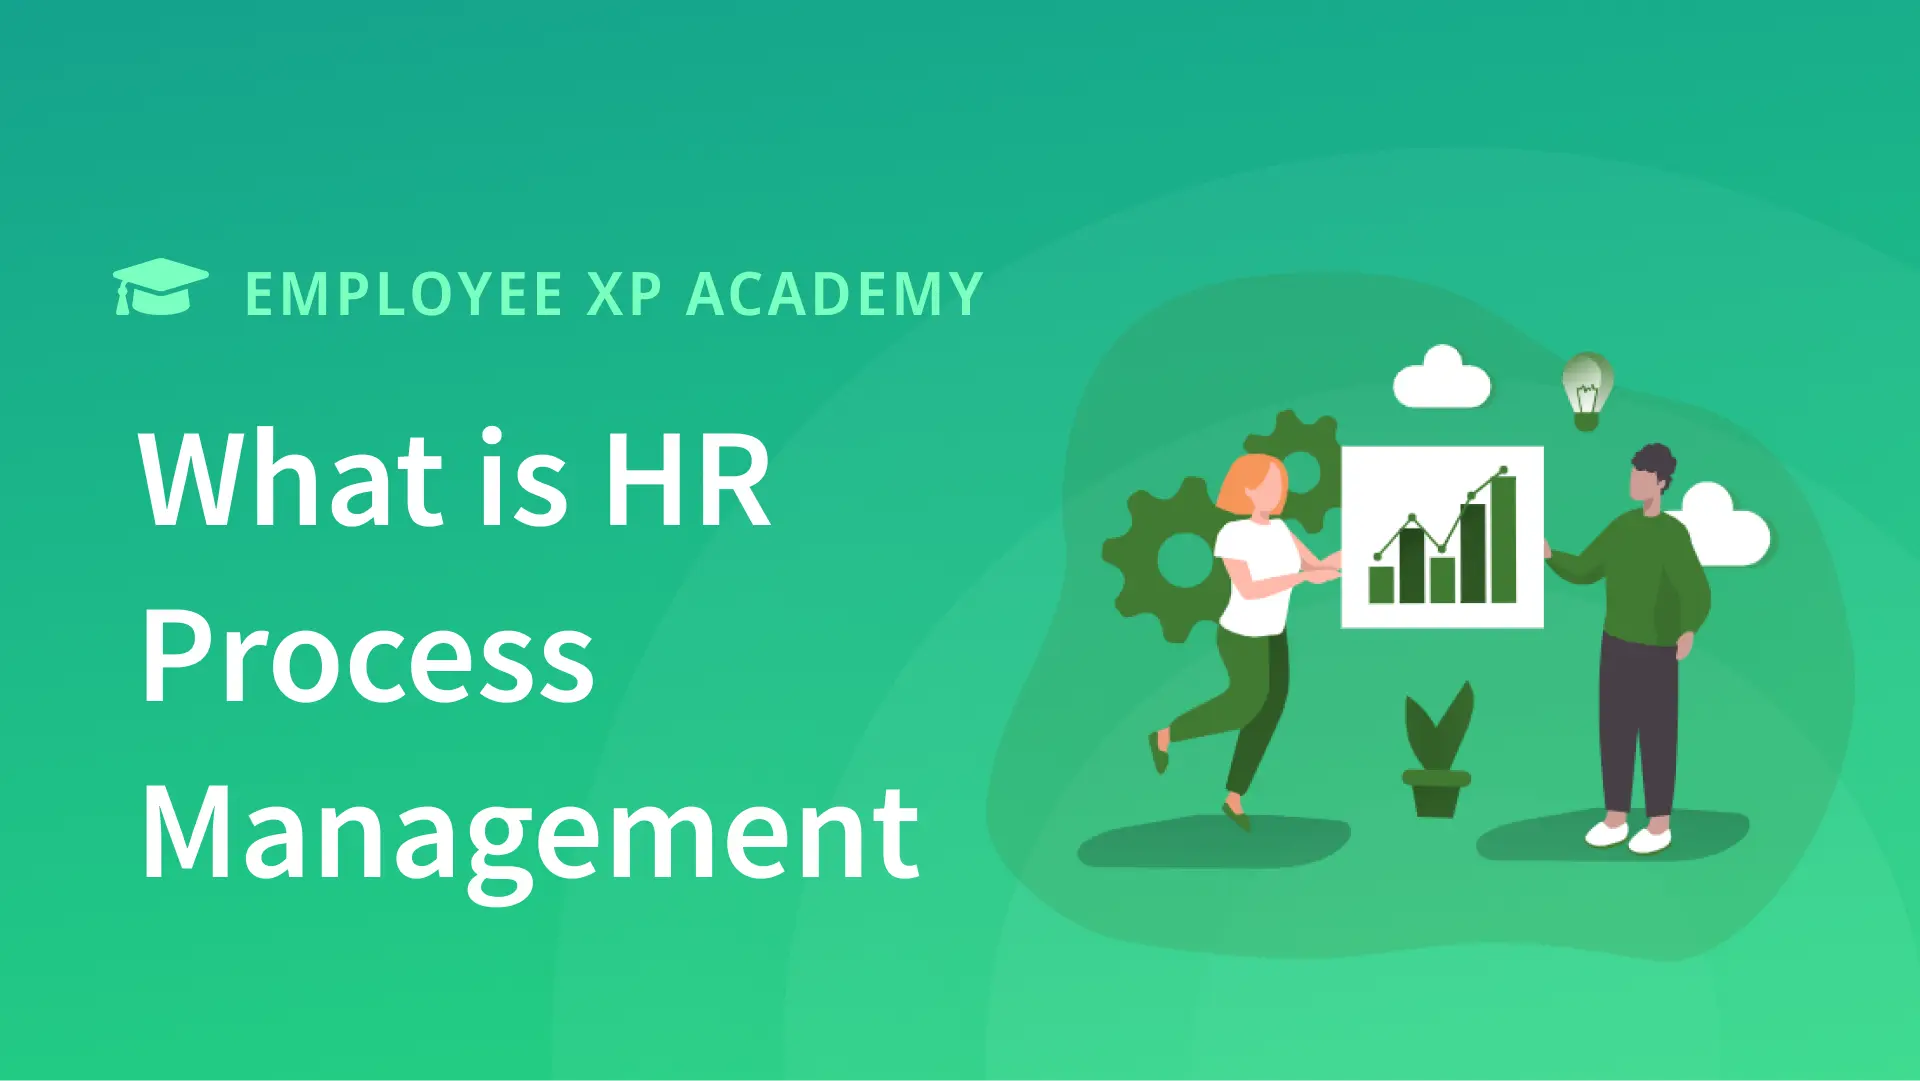 What is HR Process Management?